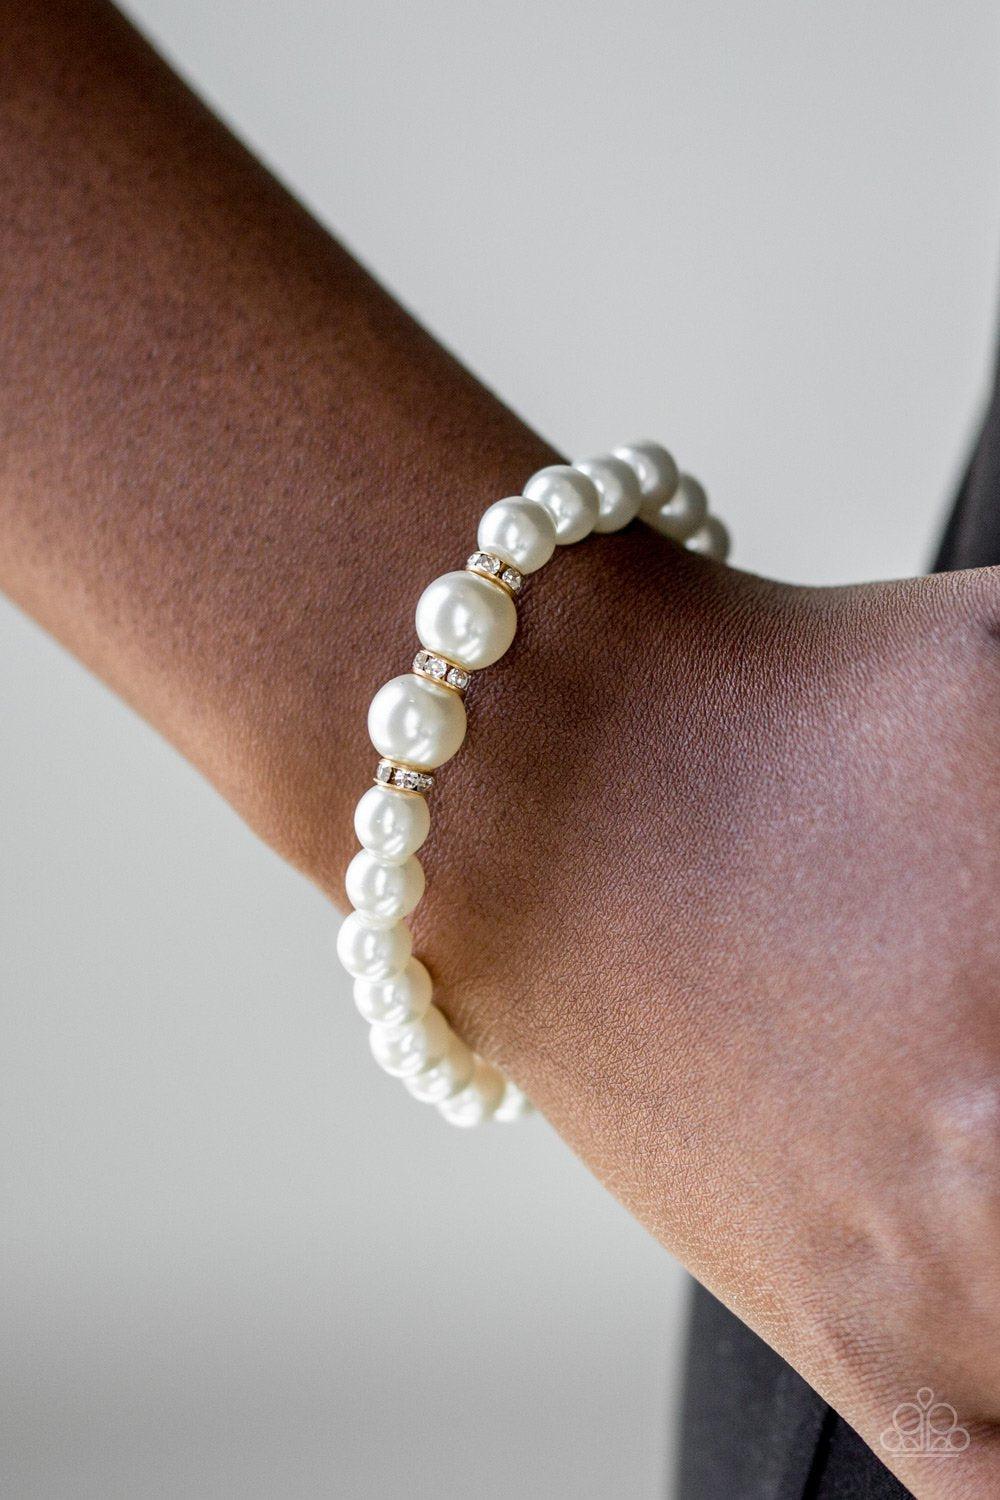 Radiantly Royal Gold and White Pearl Bracelet - Paparazzi Accessories-CarasShop.com - $5 Jewelry by Cara Jewels